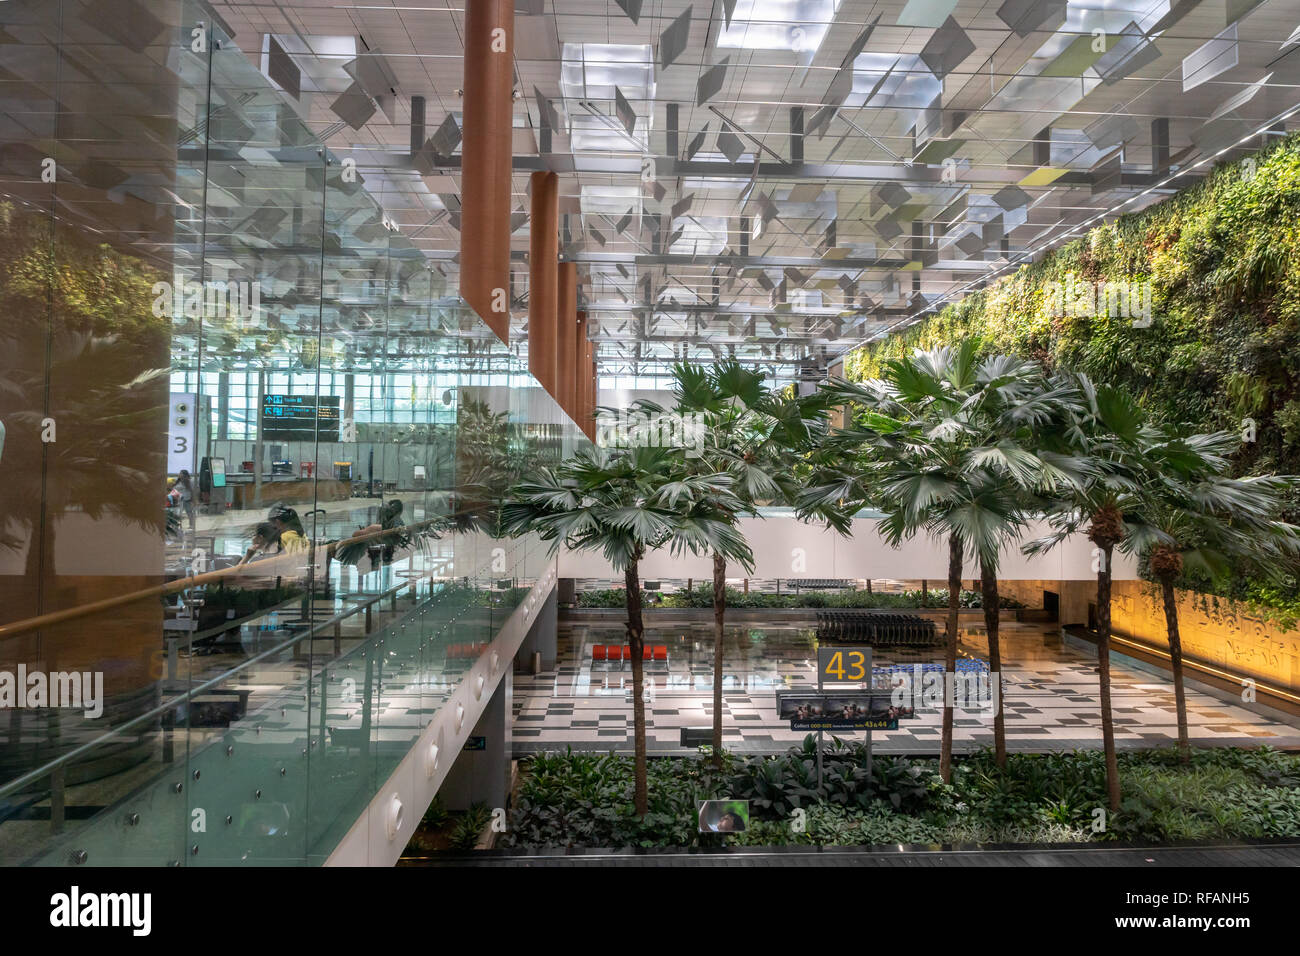 Singapore - January 2019: Singapore Changi Airport architecture and passengers. Singapore. Changi Airport is one of the largest airports in Asia. Stock Photo